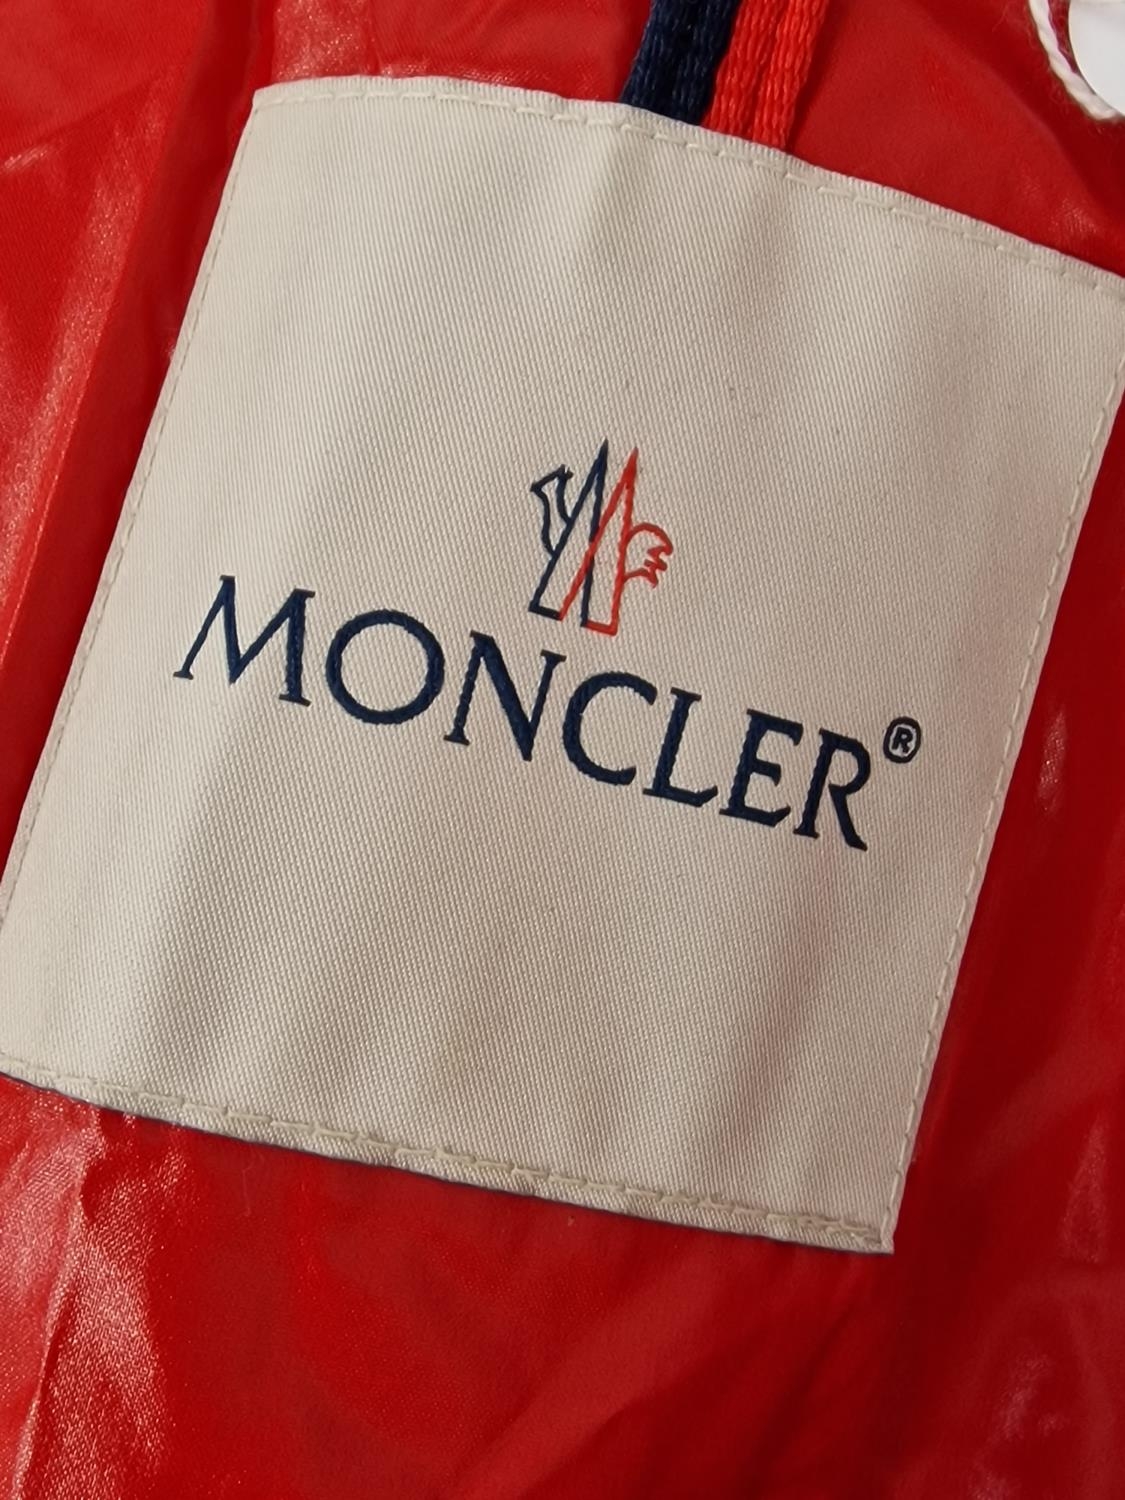 Moncler red puffer jacket size 2 in good condition with no tags (REF 229). - Image 3 of 3